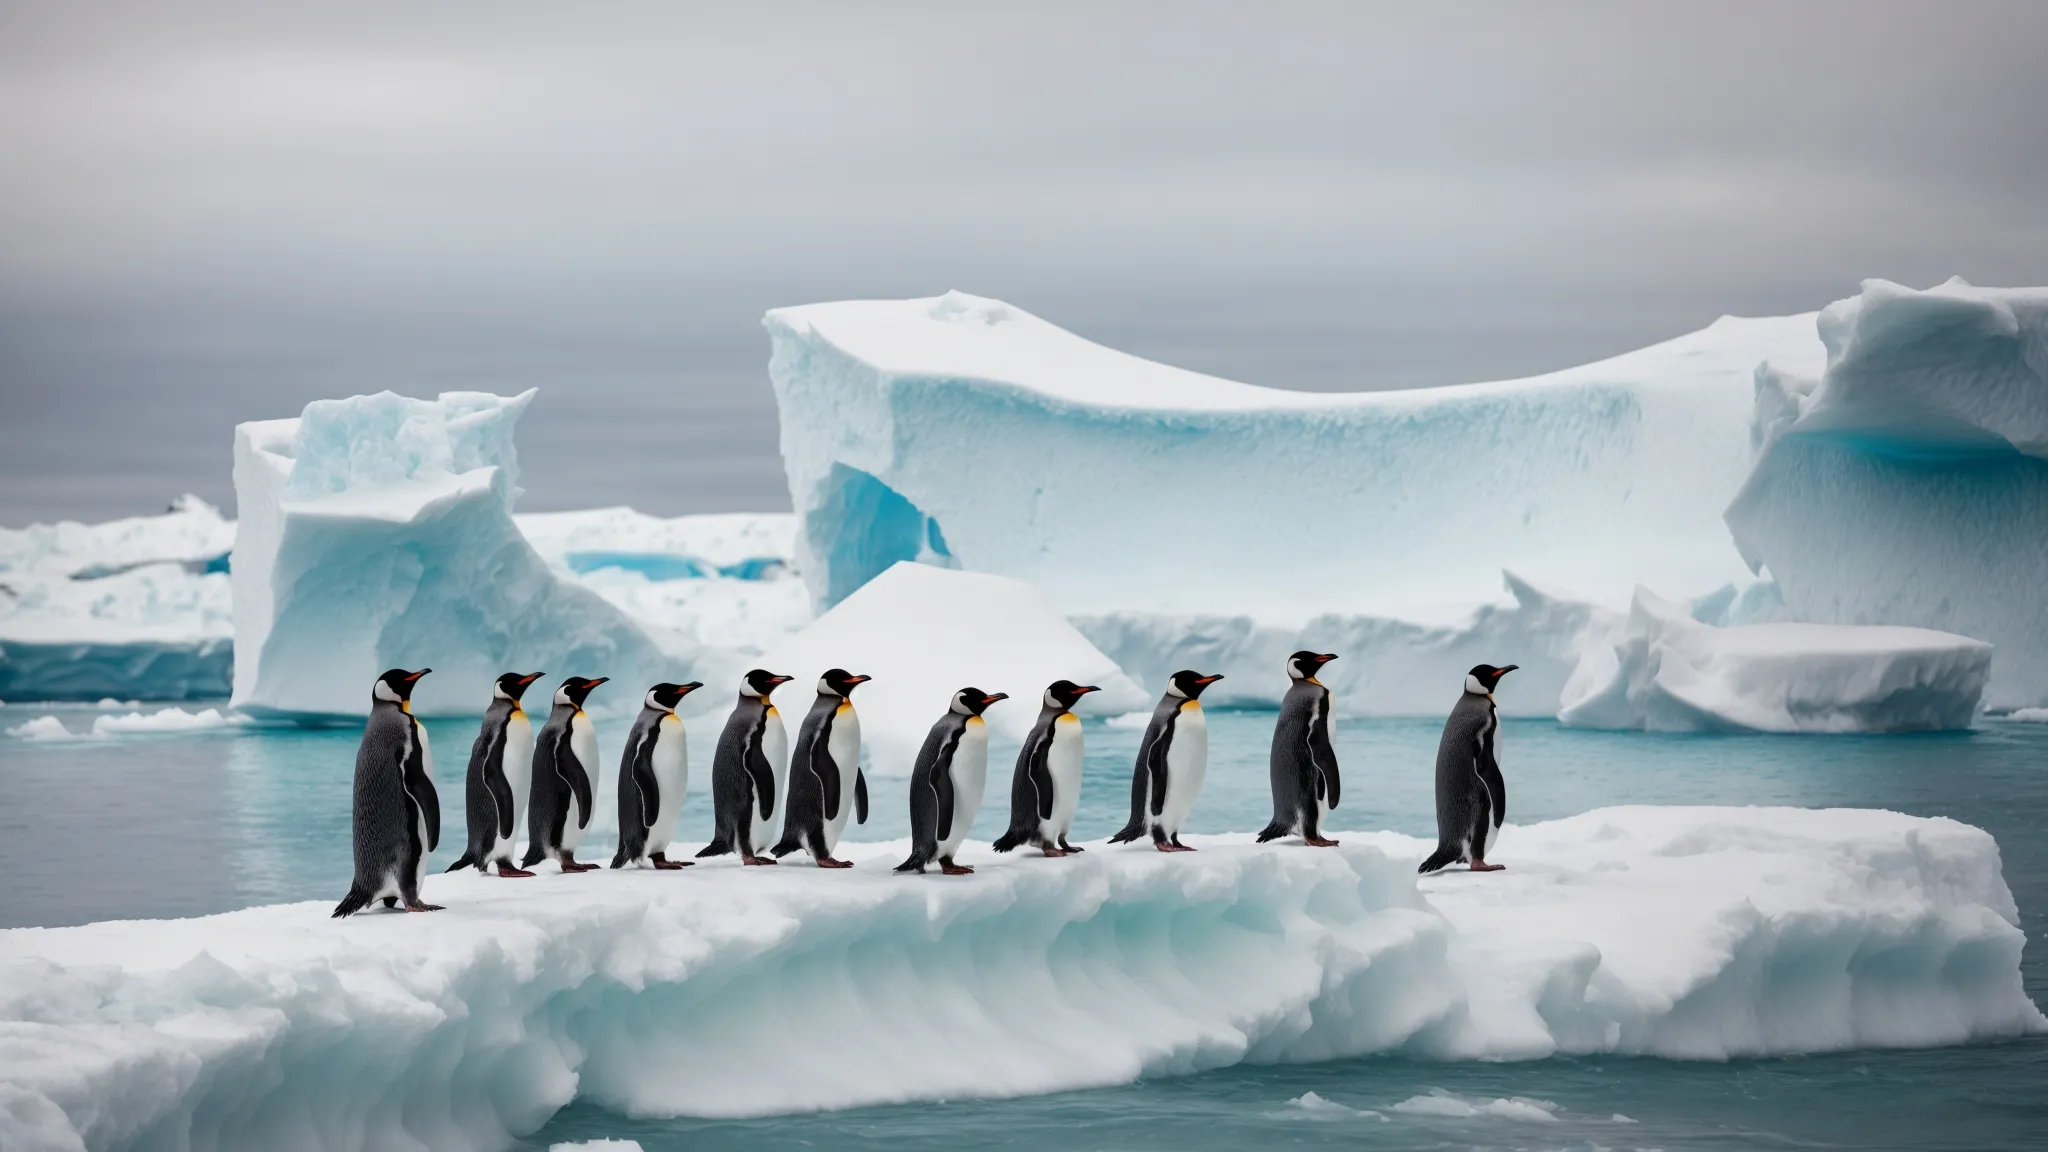 a group of penguins standing on an iceberg, using a telescope to look into the distance.